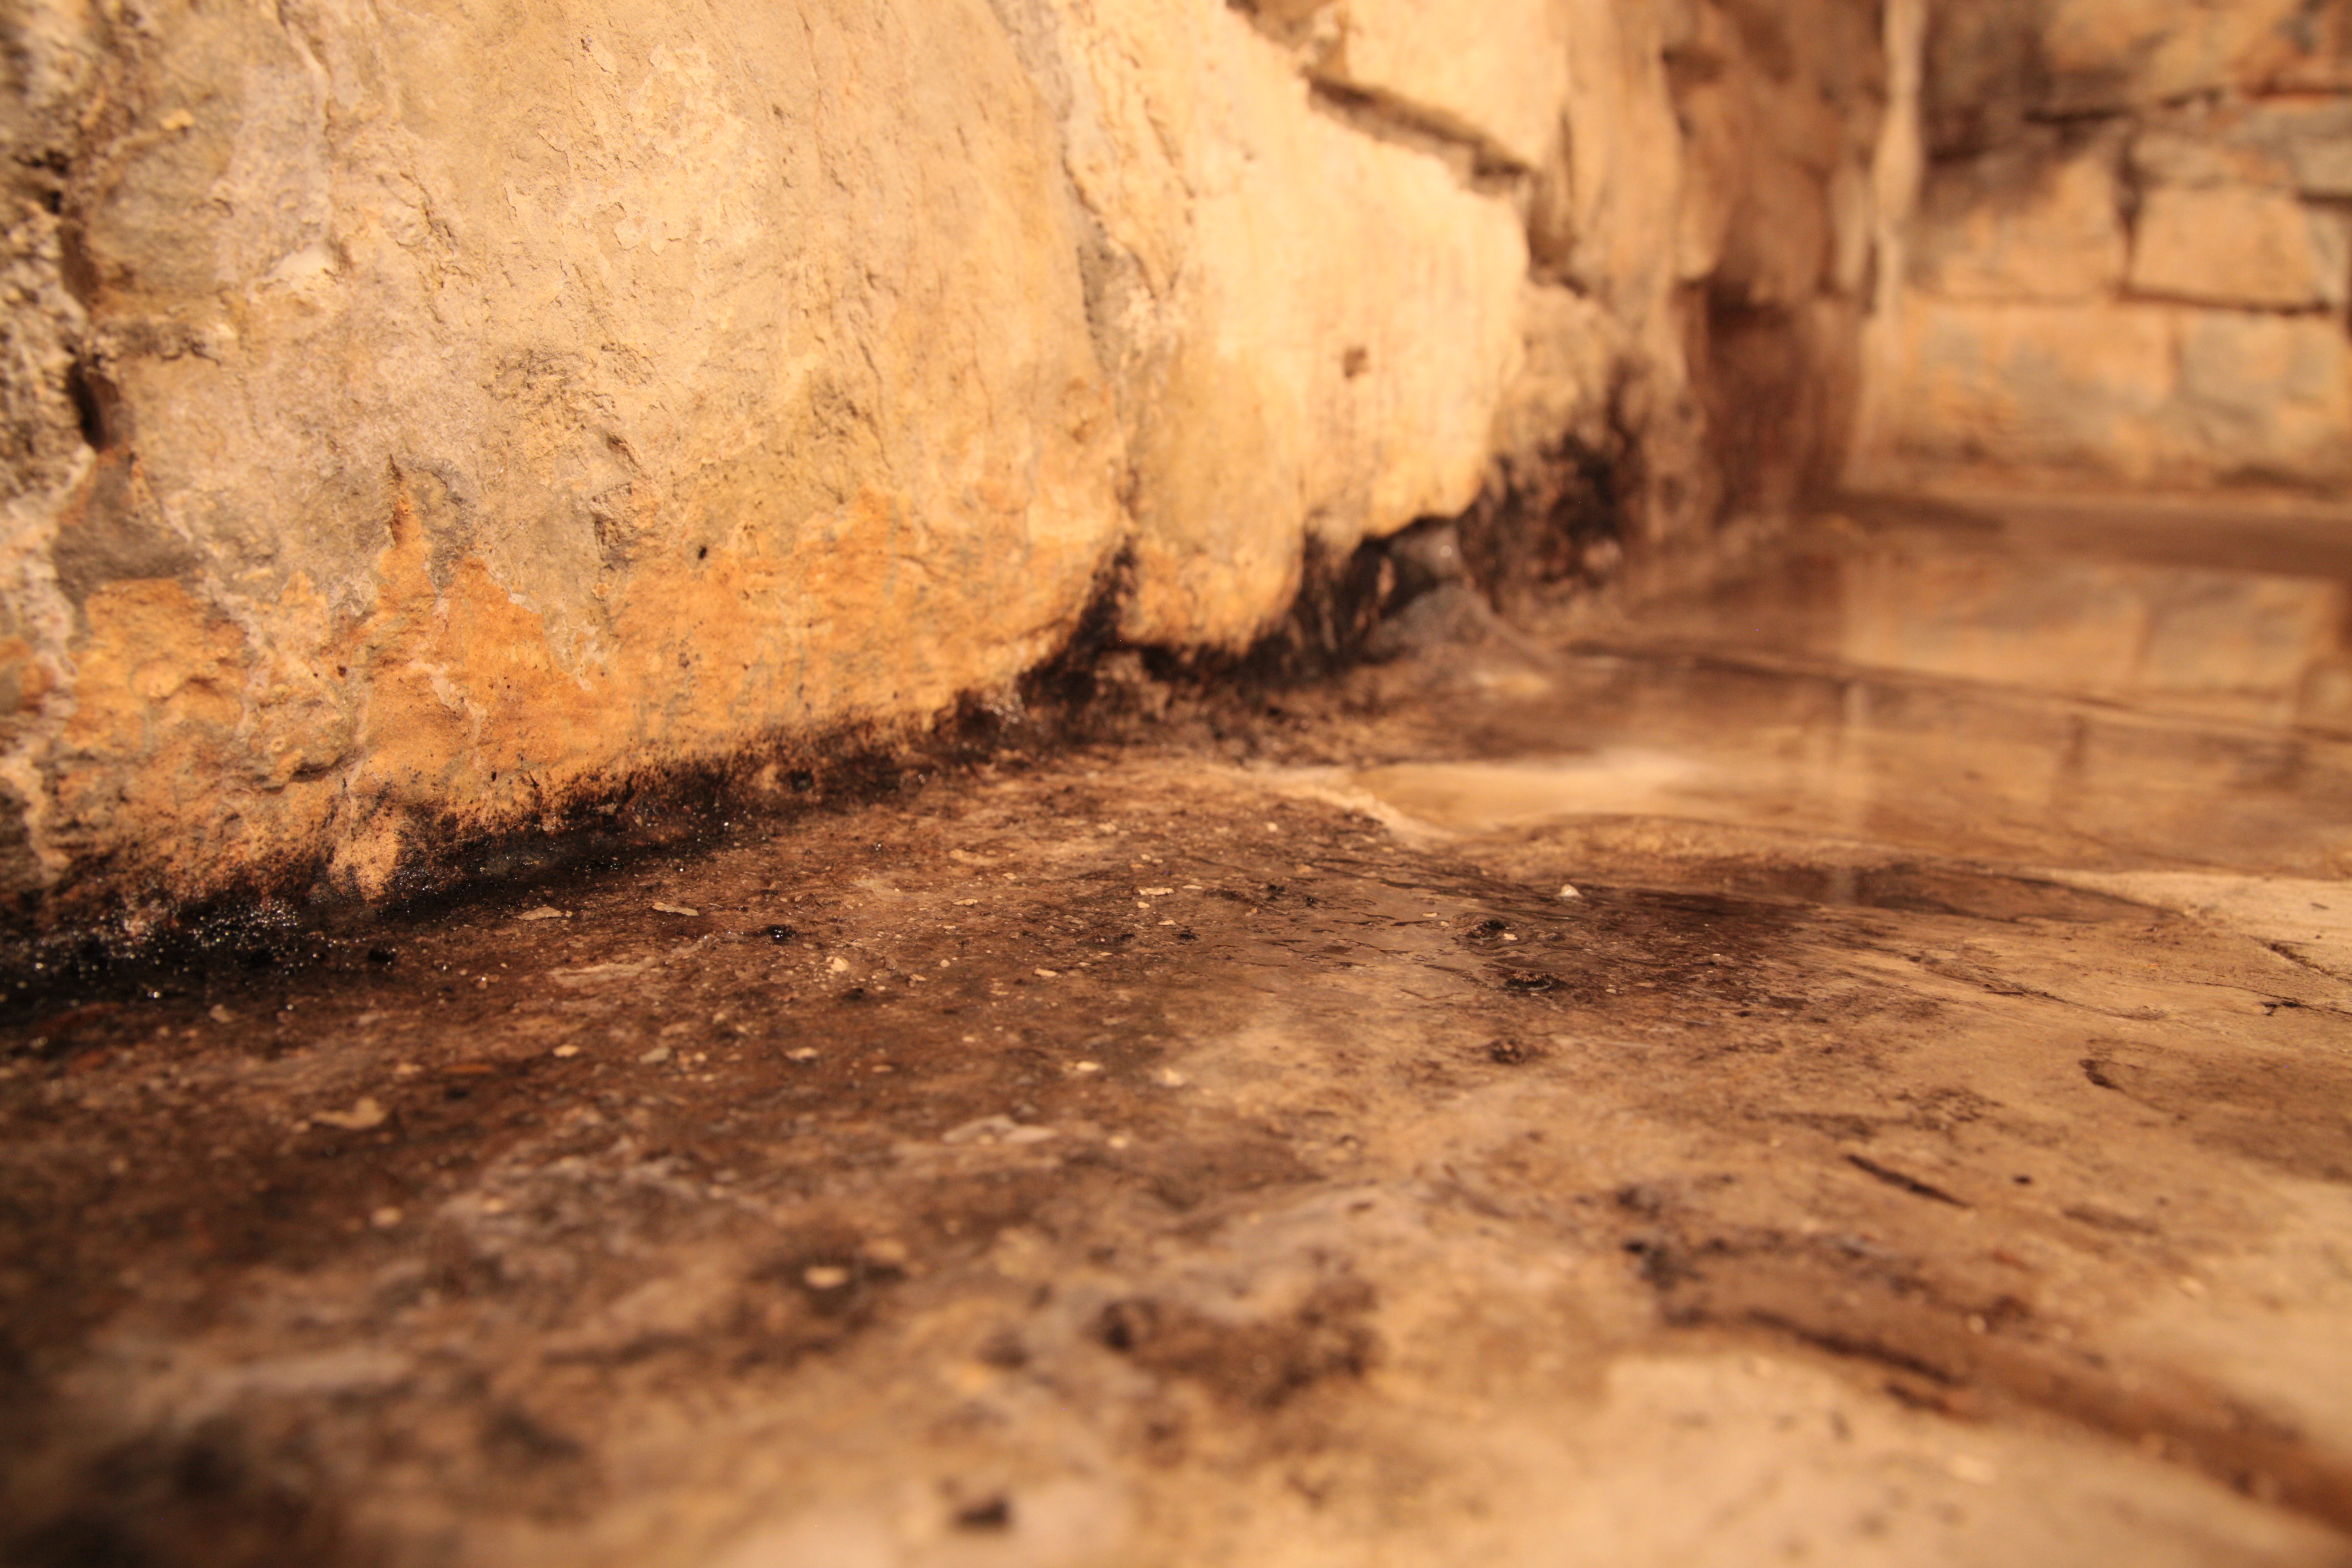 KILL MOLD An Experts Advice On Becoming Mold Free The Simple Way